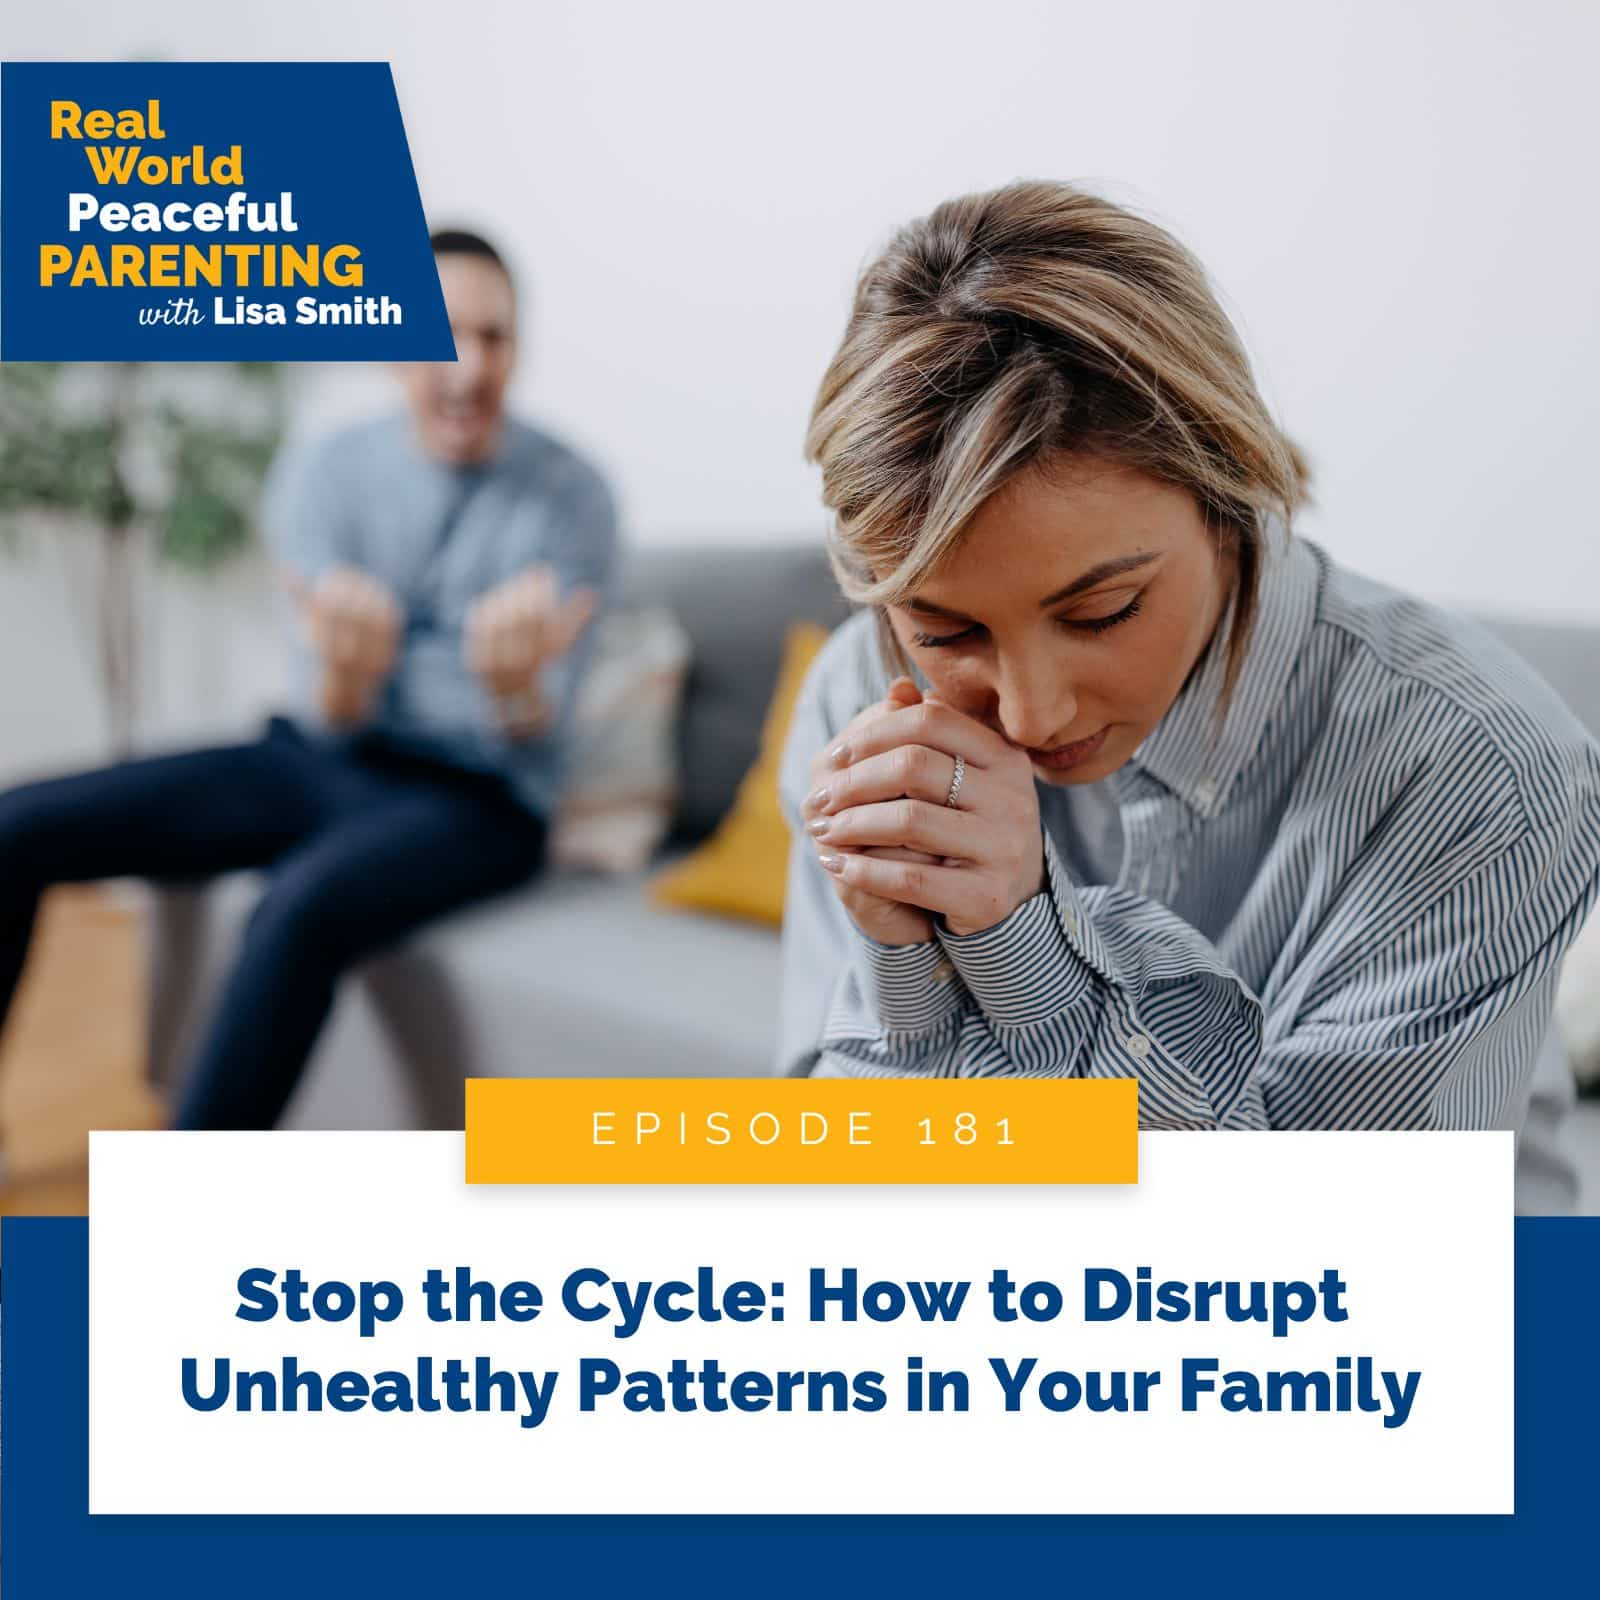 Real World Peaceful Parenting with Lisa Smith | Stop the Cycle: How to Disrupt Unhealthy Patterns in Your Family